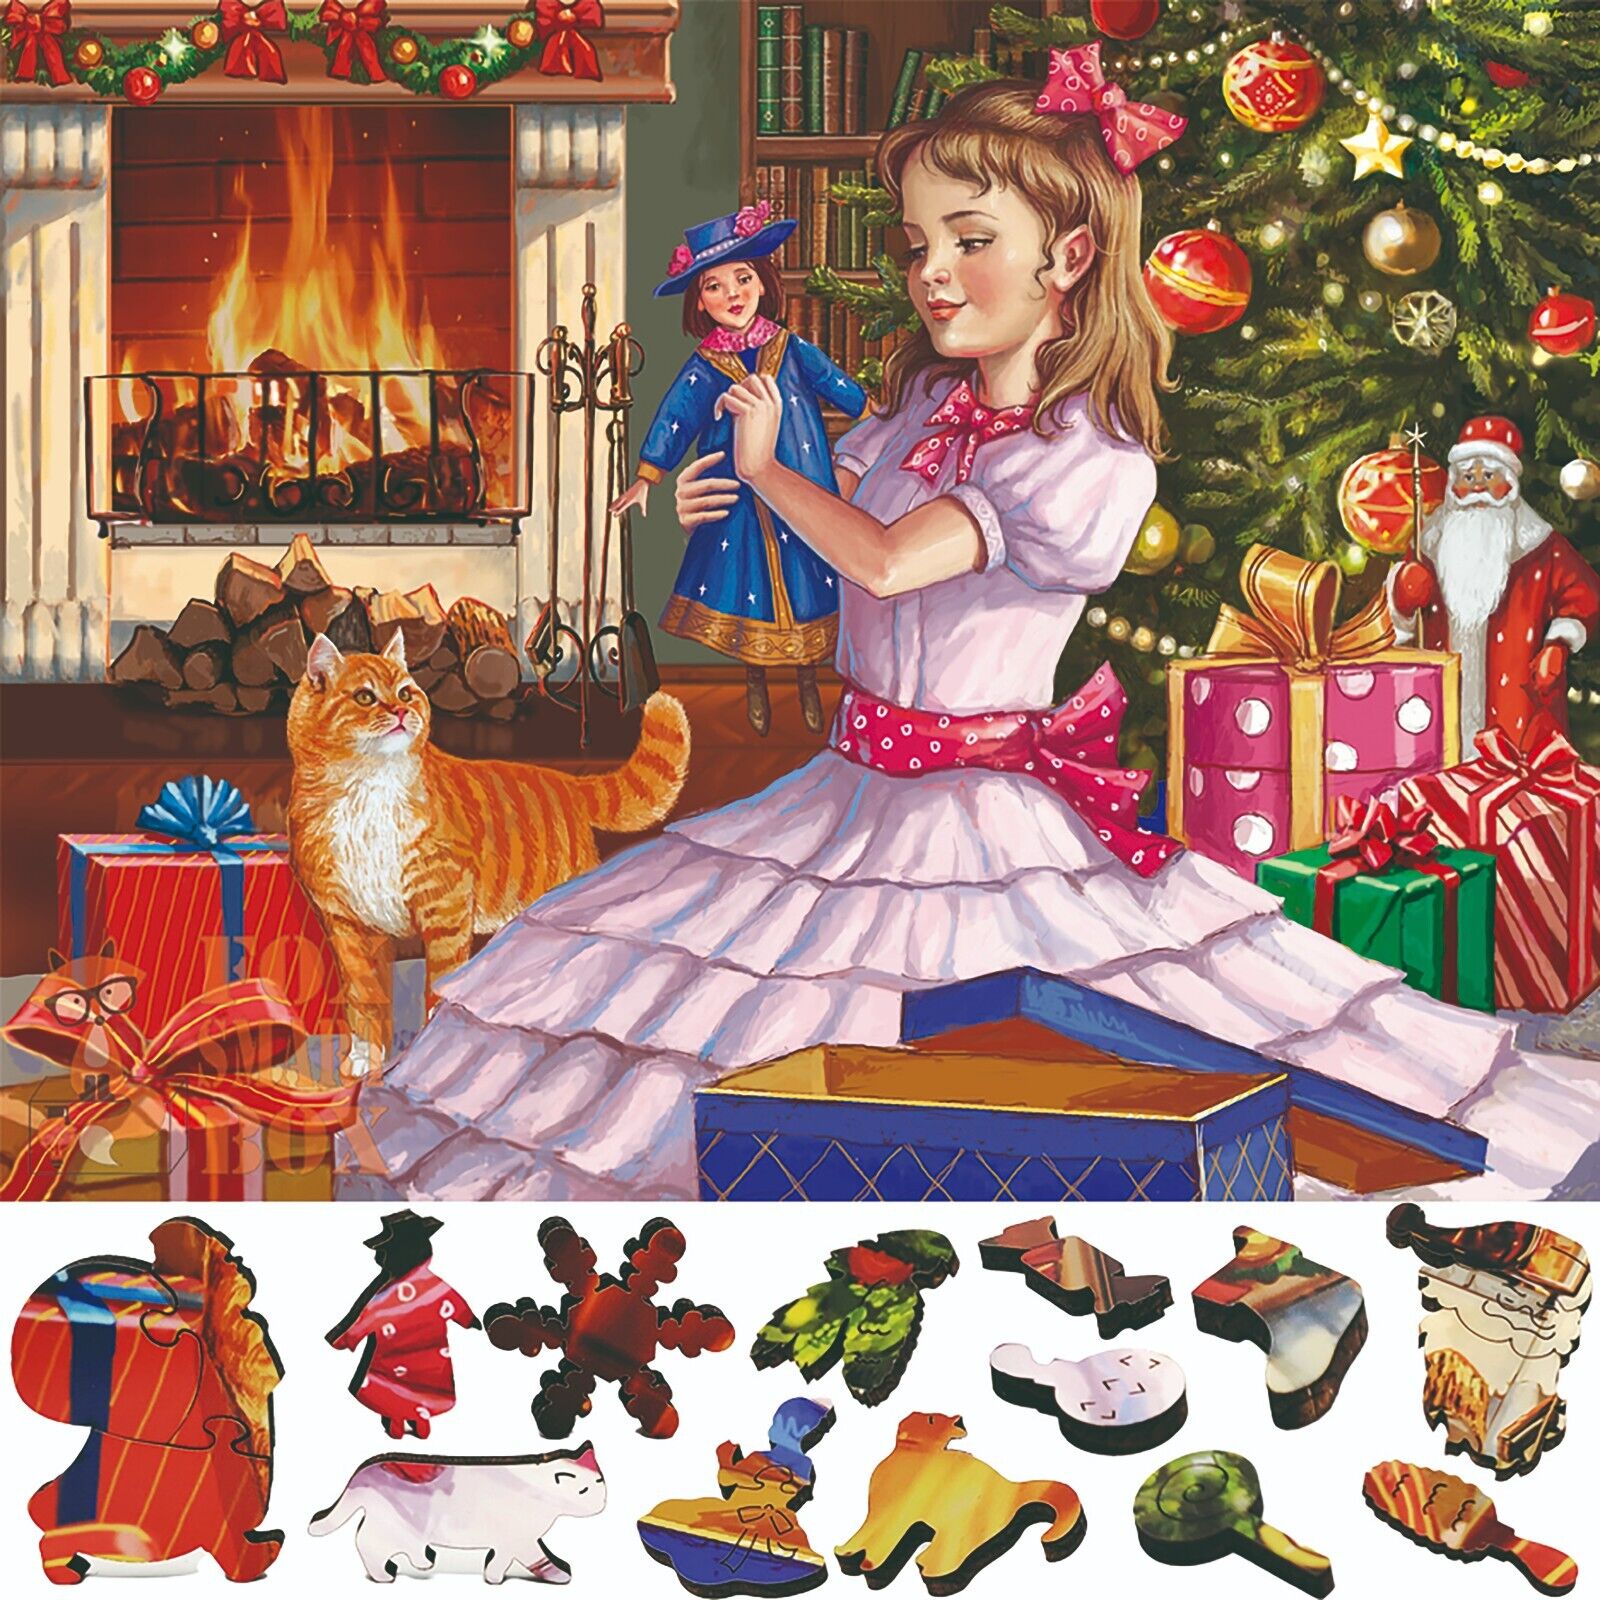 Wooden Jigsaw Puzzles for Adults by FoxSmartBox - 465 Pieces - Christmas Gift